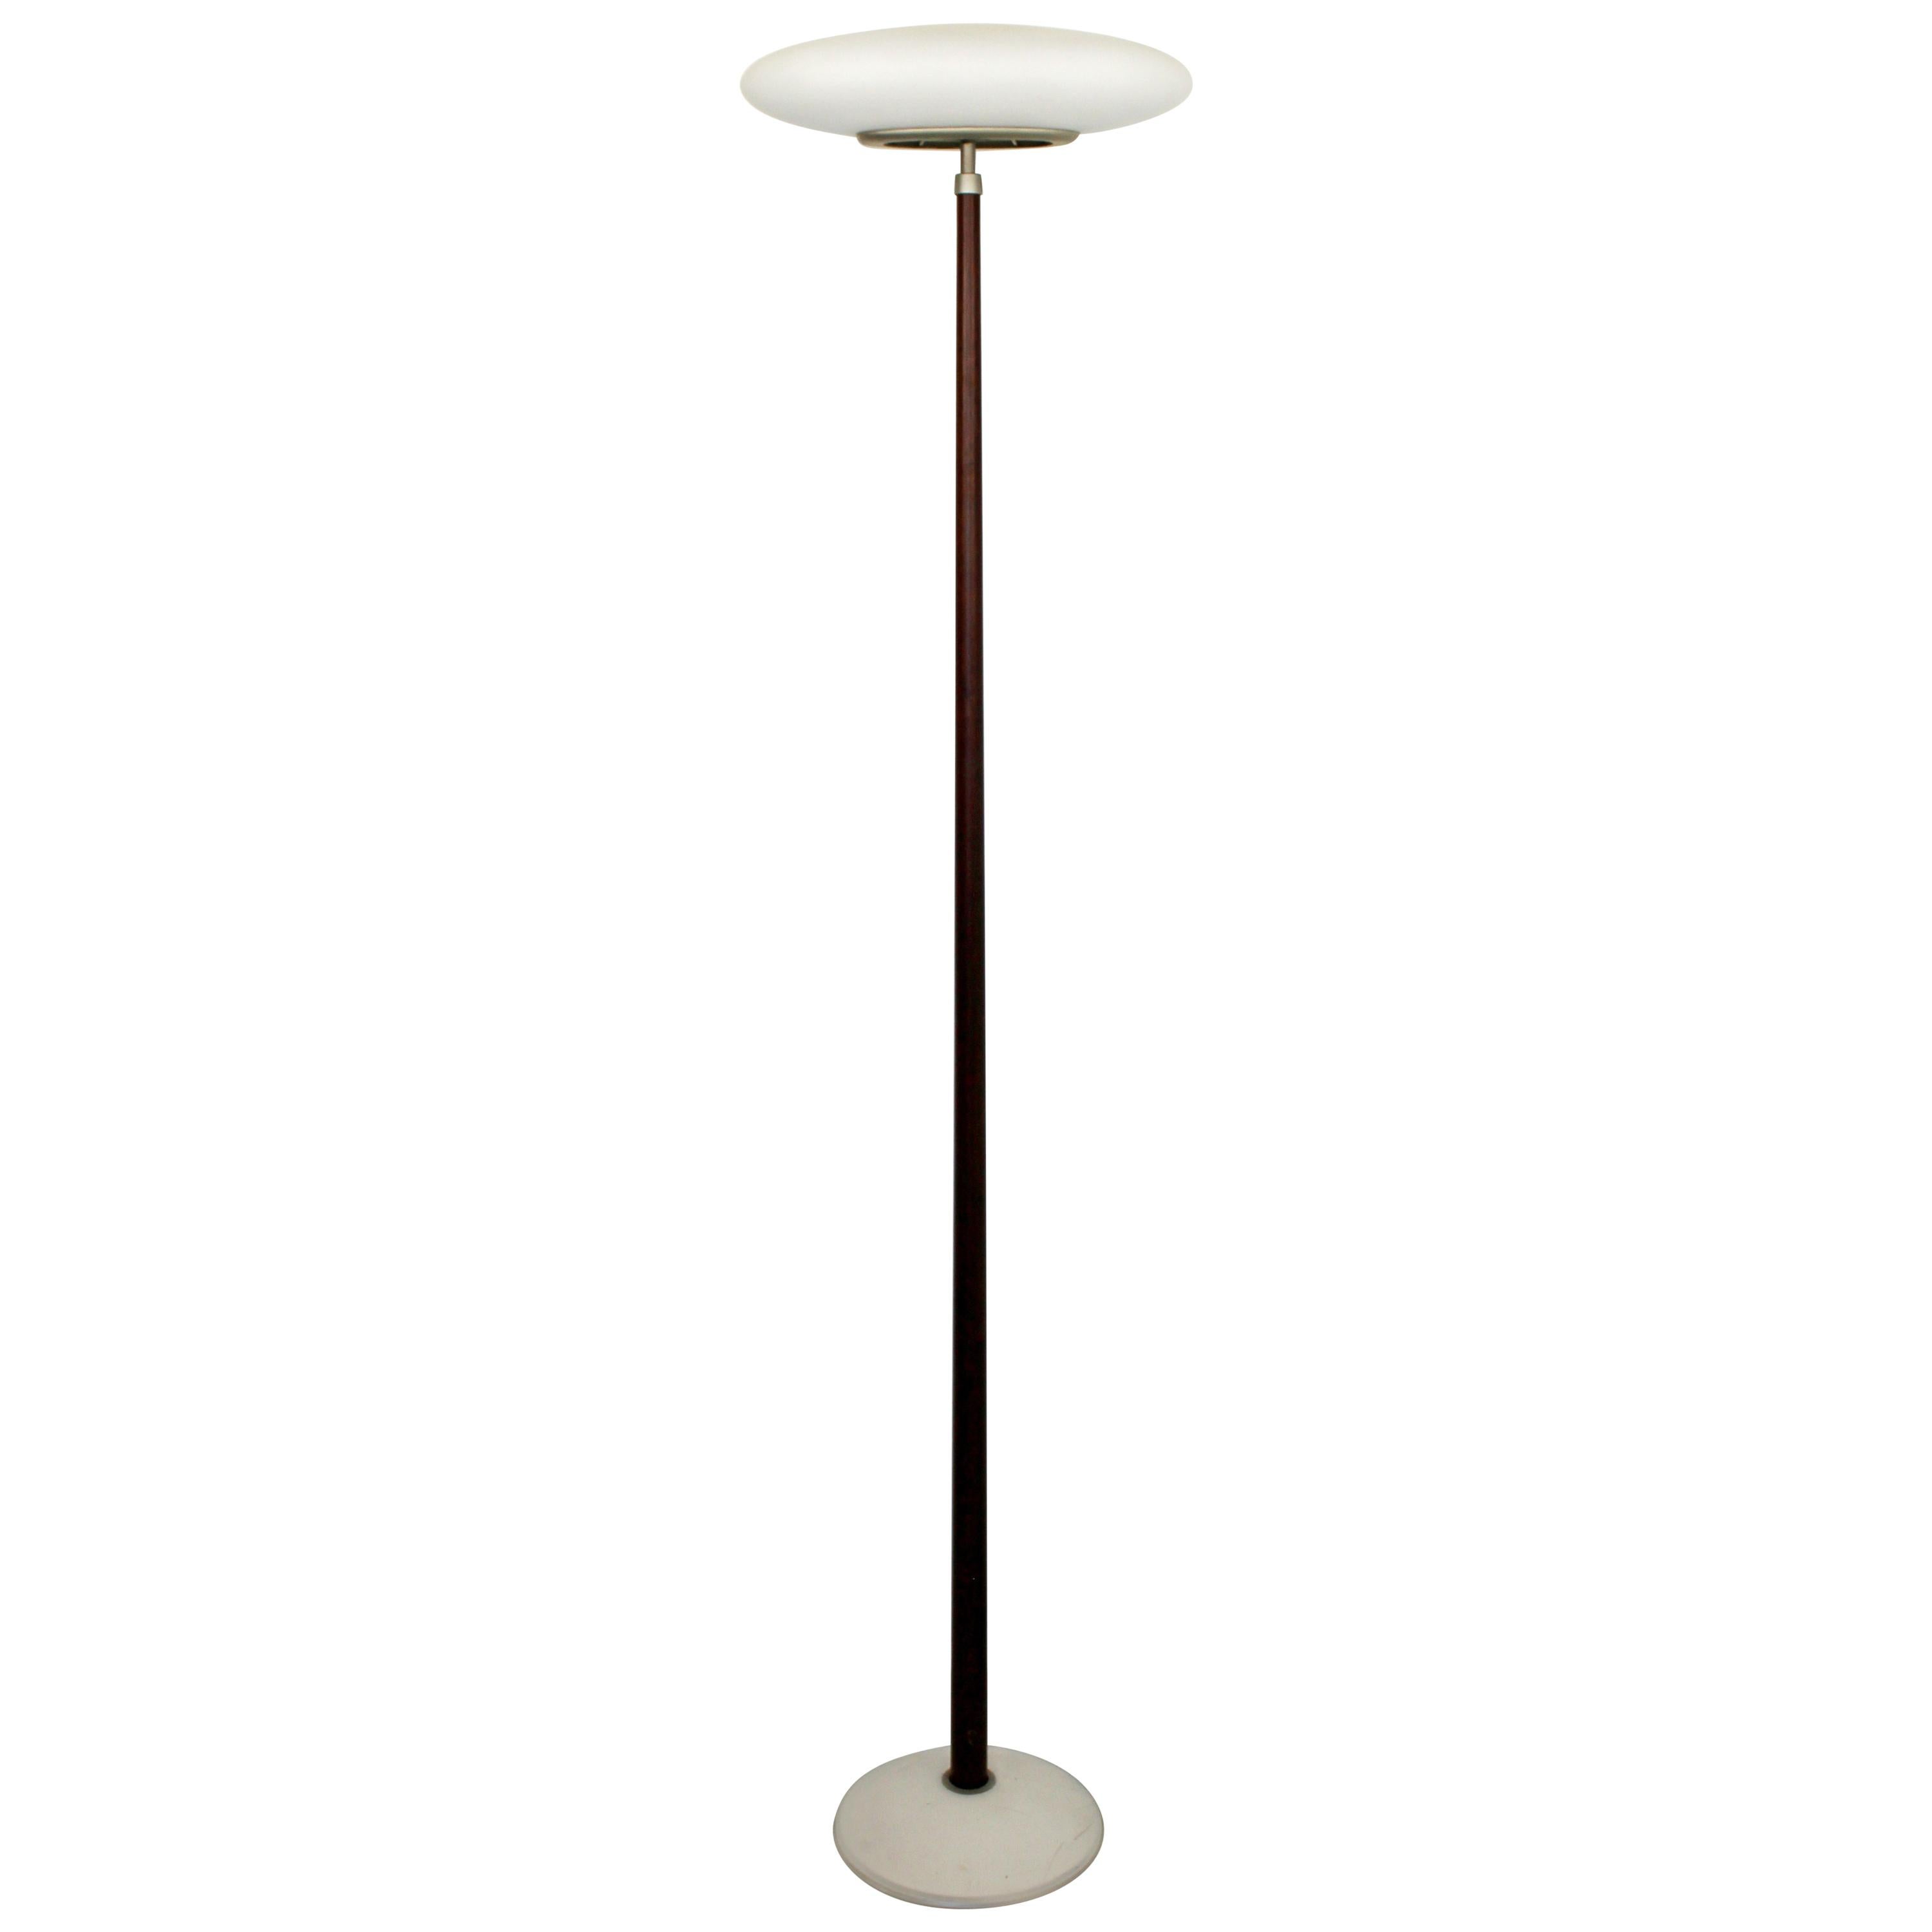 For your consideration is a fantastic and tall, wood floor lamp, with an oval glass shade, by Arkitektura, circa 1980s. In good vintage condition. The dimensions are 17